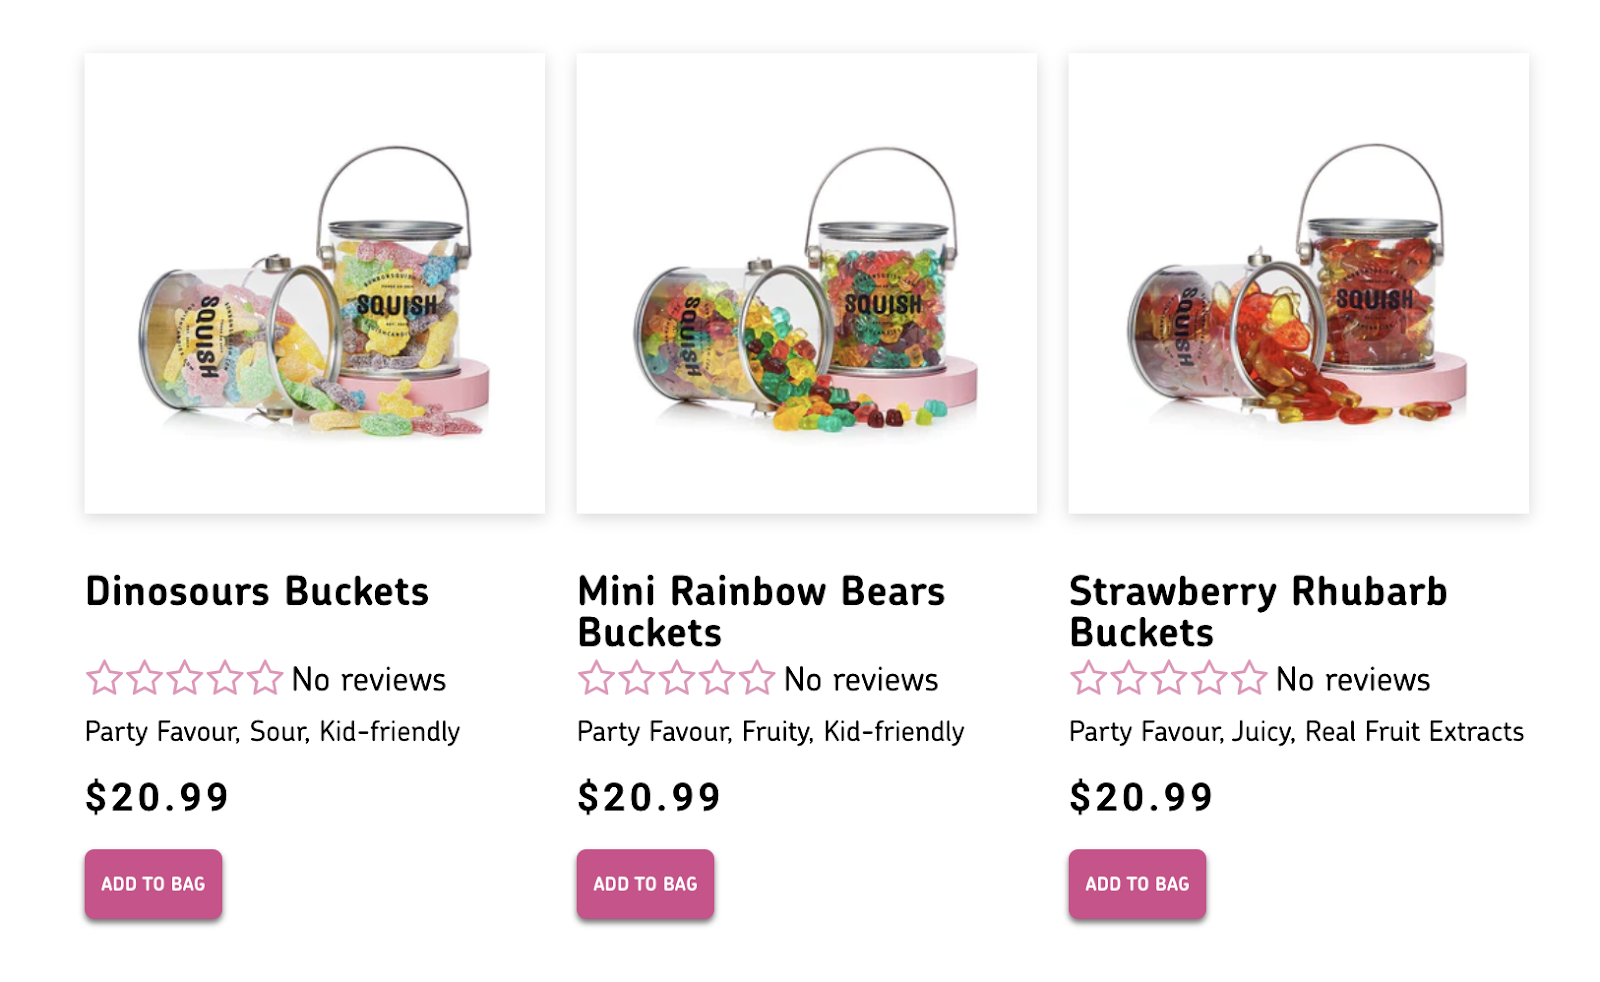 5 best referral program examples–A screenshot showing various Squish products including Dinosours Buckets, Mini Rainbow Bears Buckets, and Strawberry Rhubarb Buckets. 